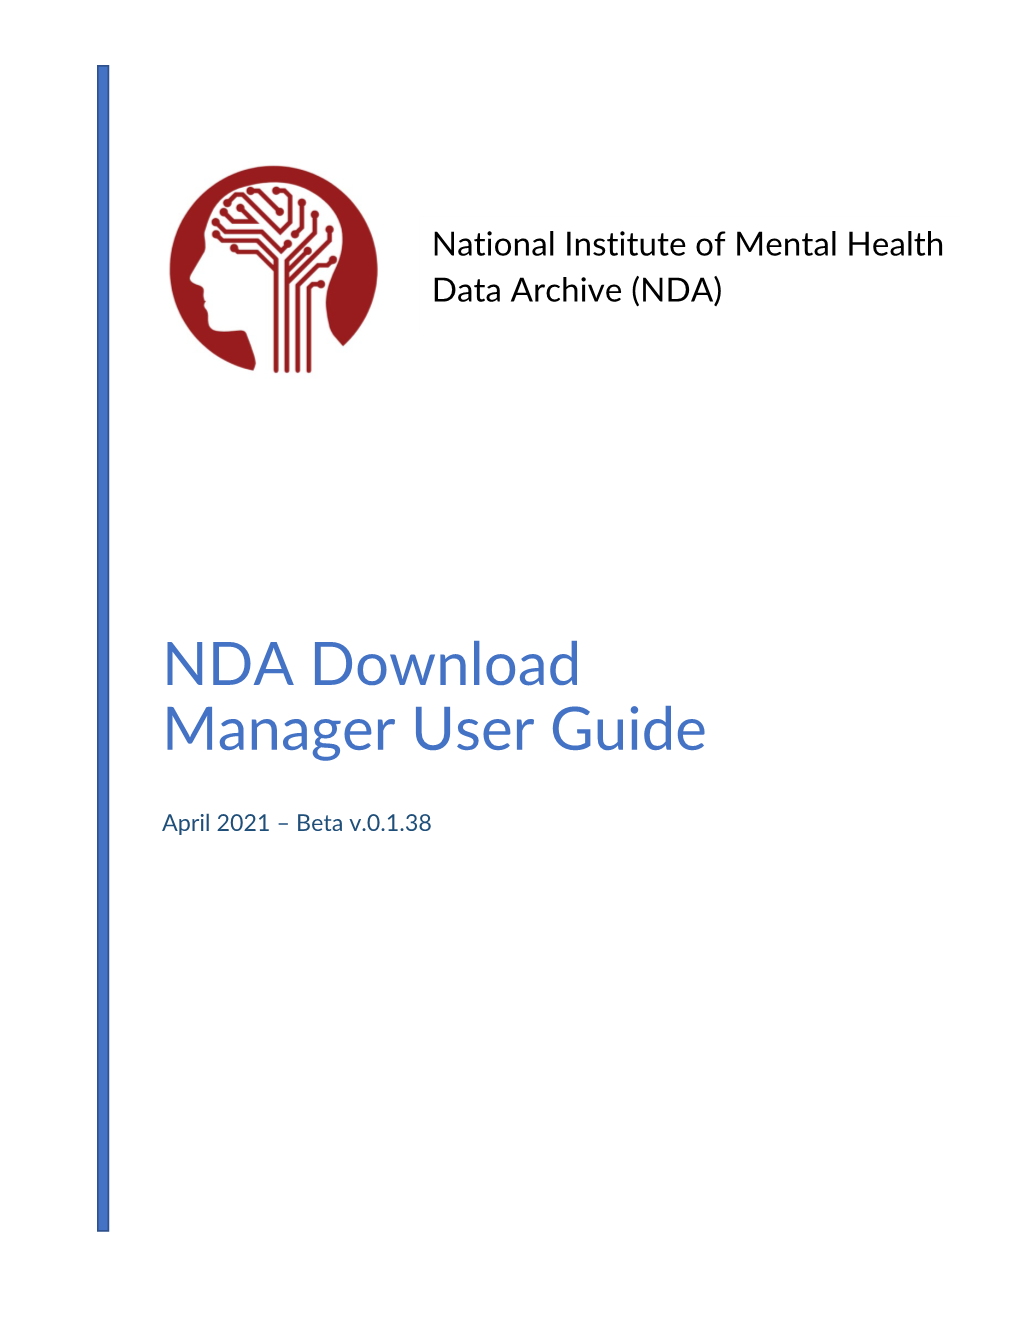 NDA Download Manager User Guide